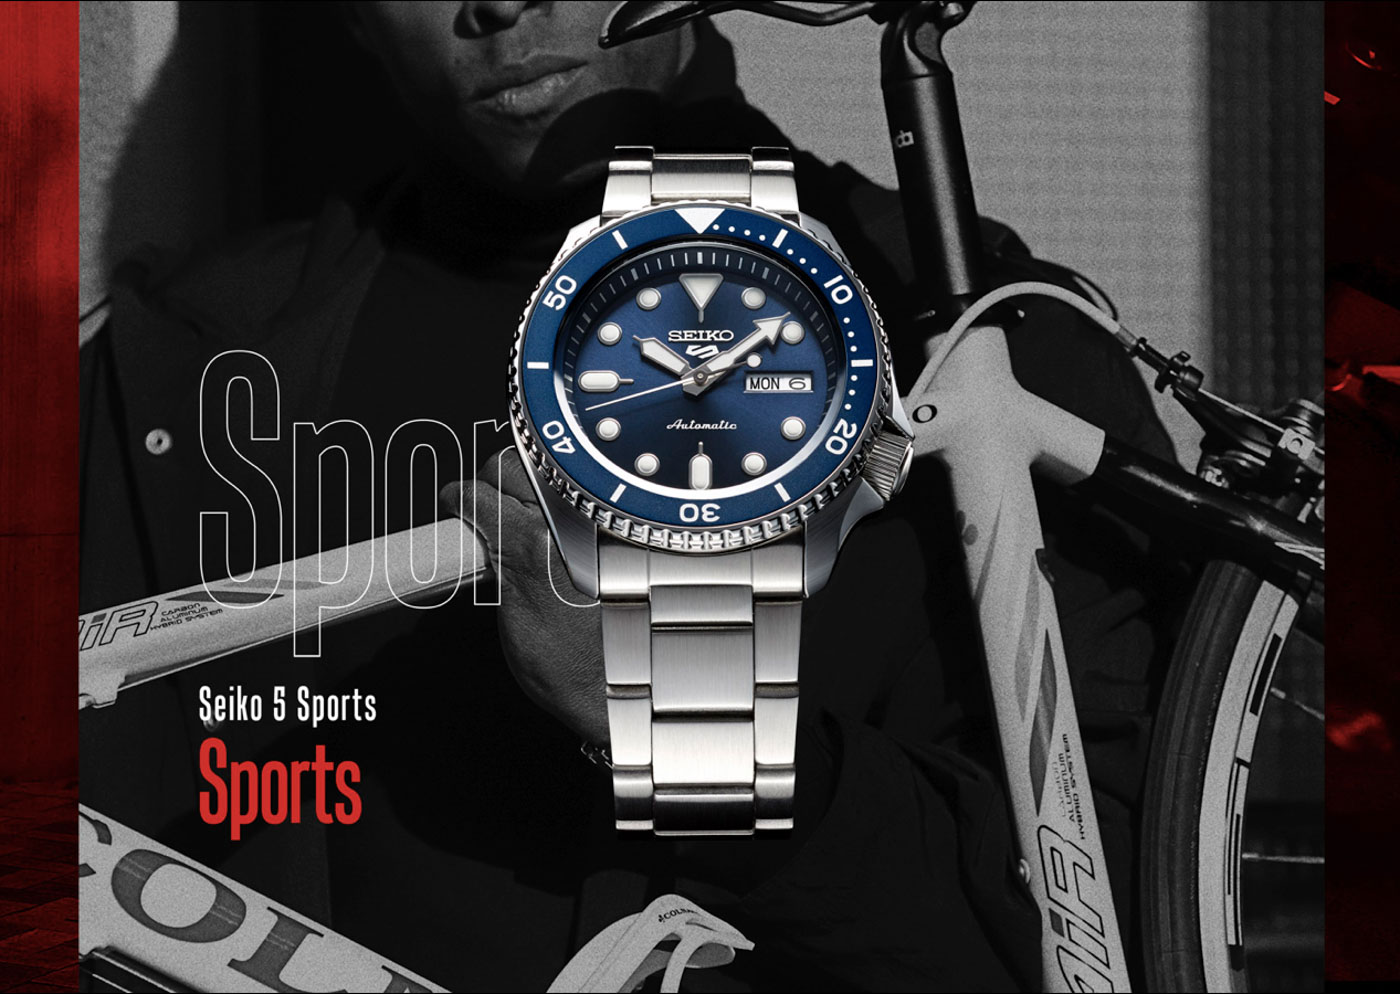 Seiko 5 Sports Watch Collection Completely Revised For 2019 | aBlogtoWatch